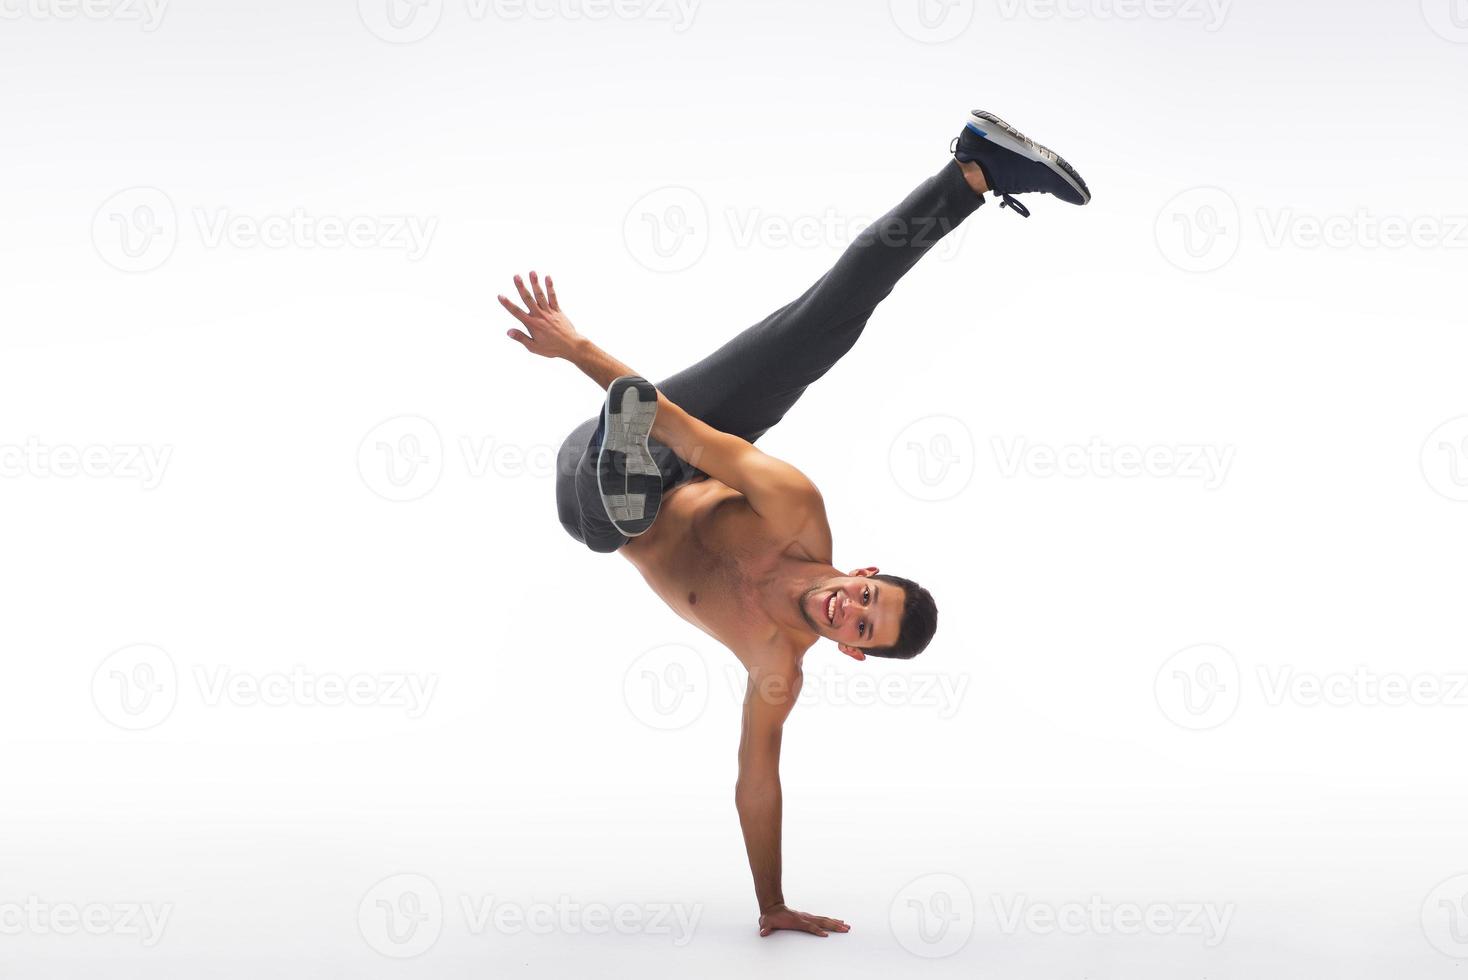 Cool young break dancer performing in studio on white background. photo